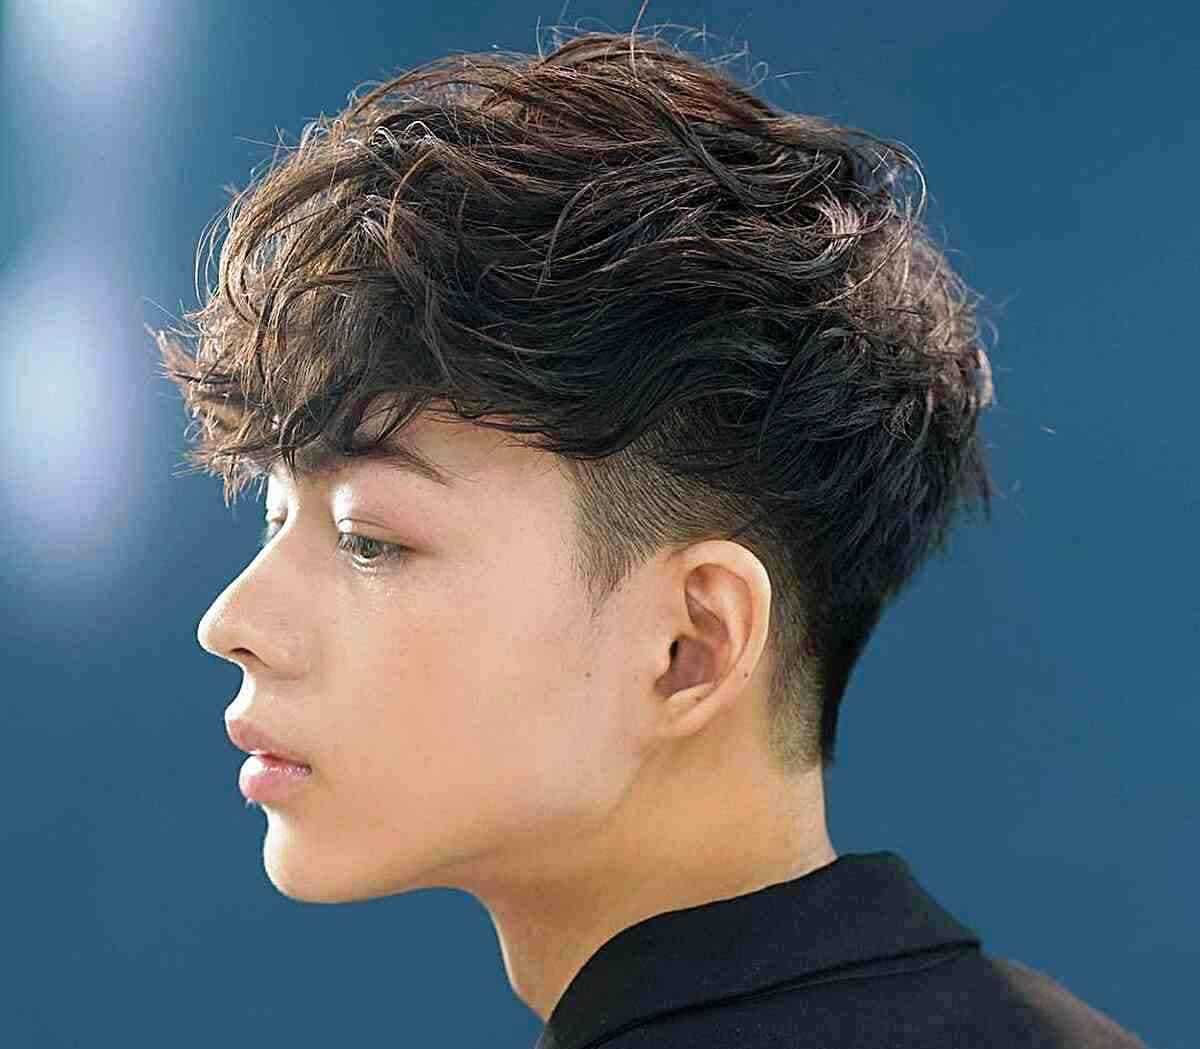 Finding the Best FTM Haircut | OutCoast.com